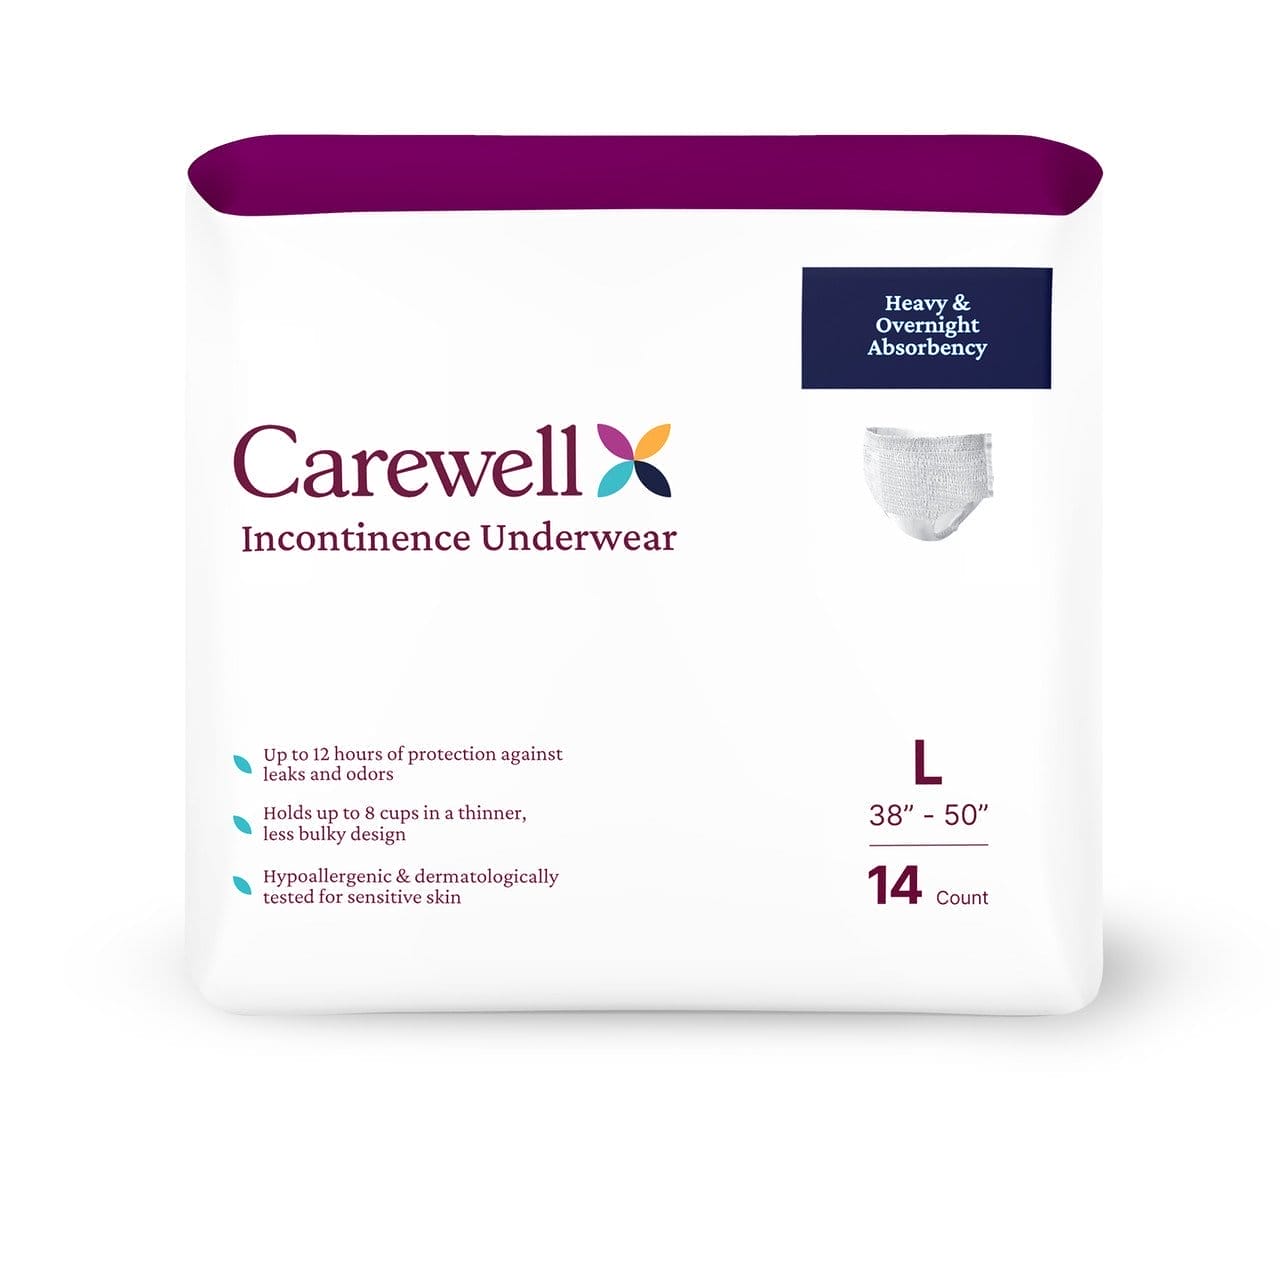 Image of Carewell Overnight Incontinence Underwear